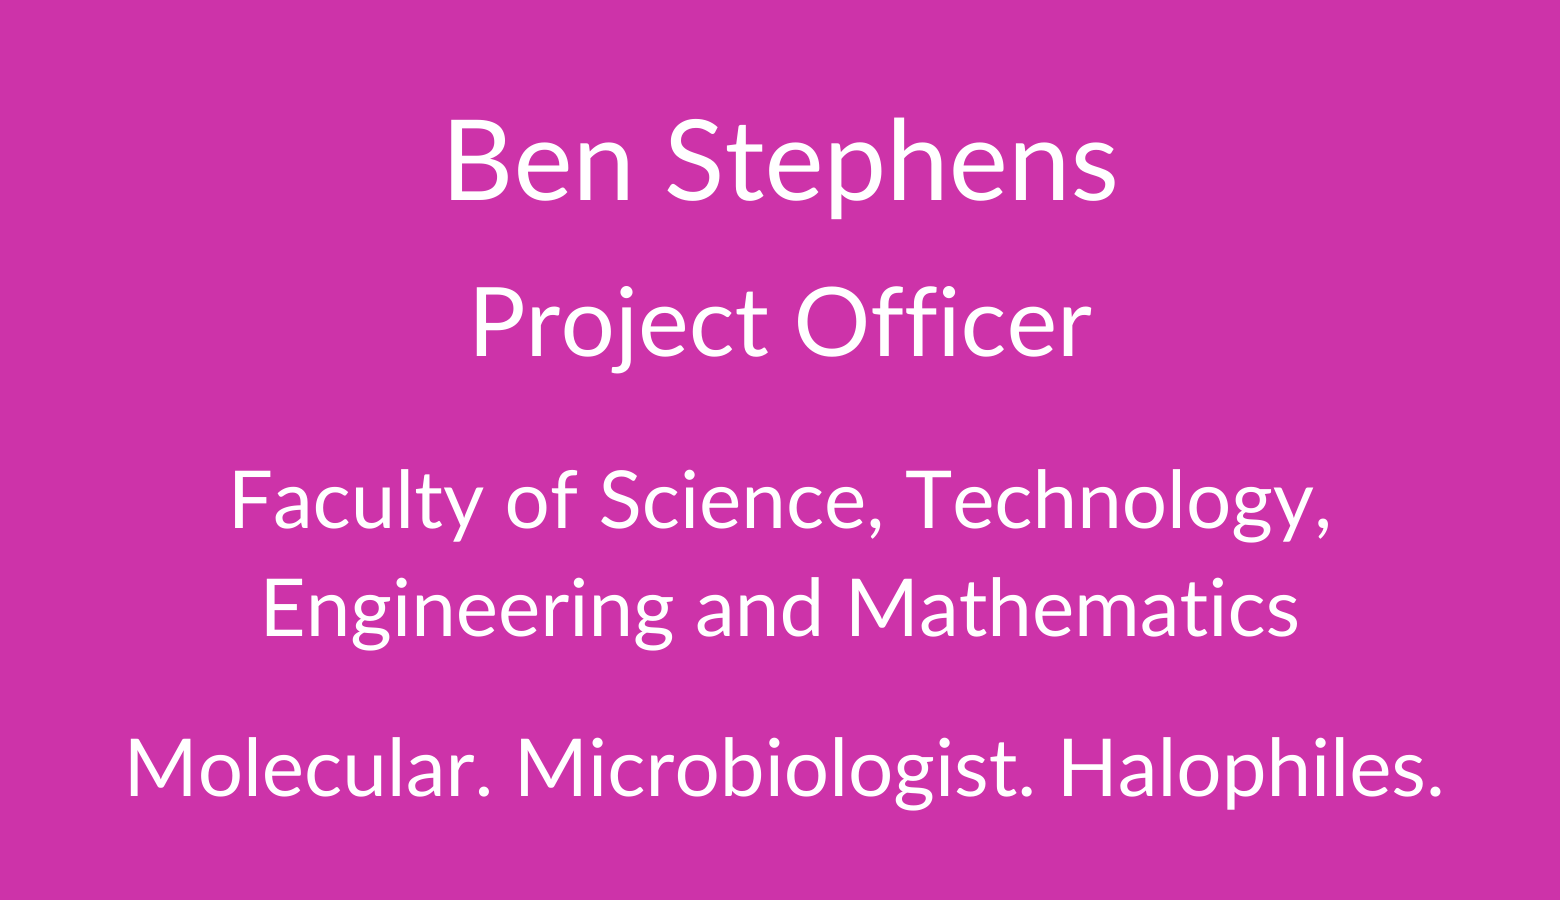 Ben Stephens. Research Technician. Faculty of Science. Technology, Engineering and Mathematics. Molecular. Microbiologist. Halophiles.